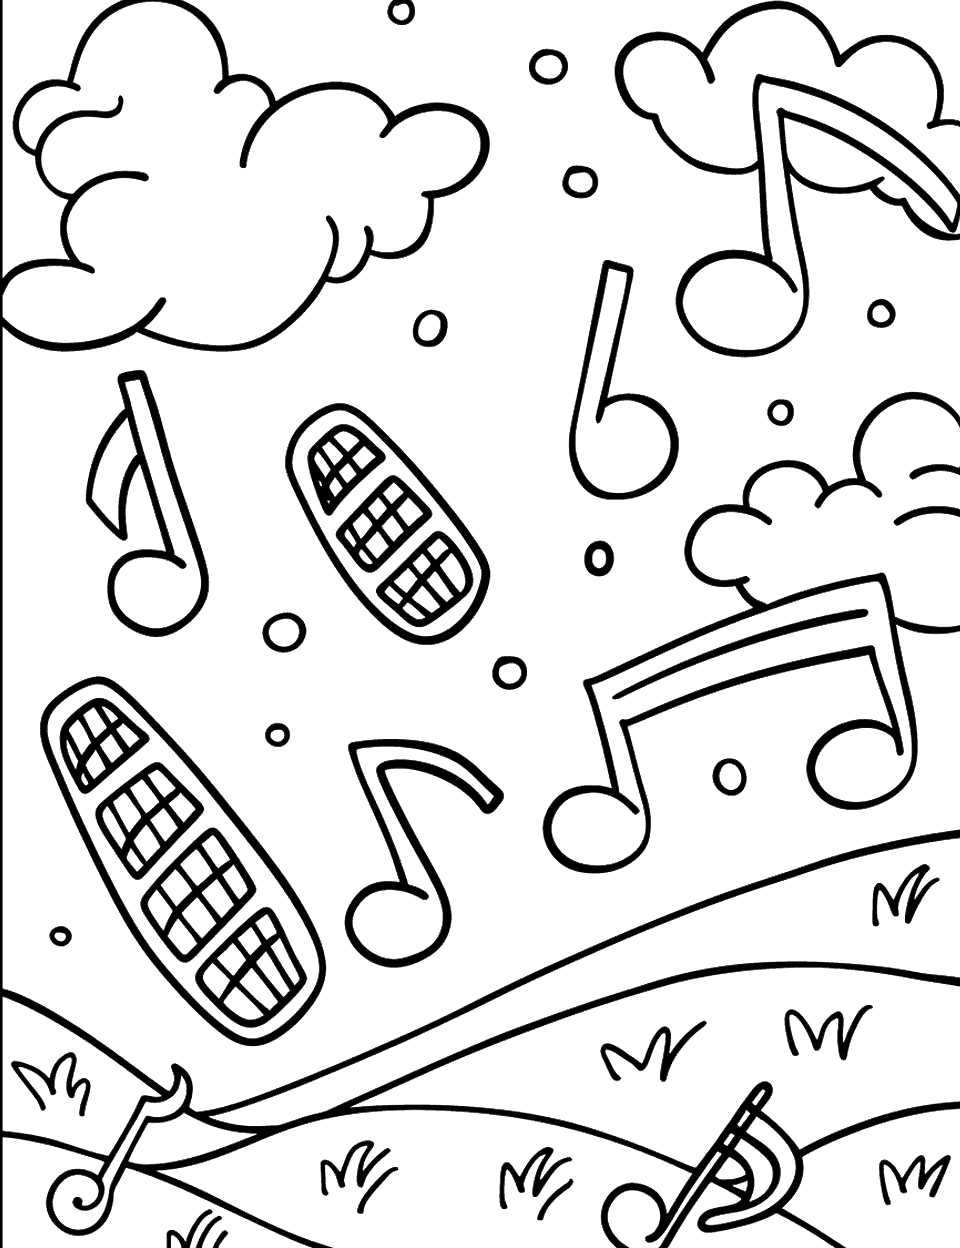 Music Notes in the Sky Coloring Page - Clouds shaped like music notes floating above a landscape.